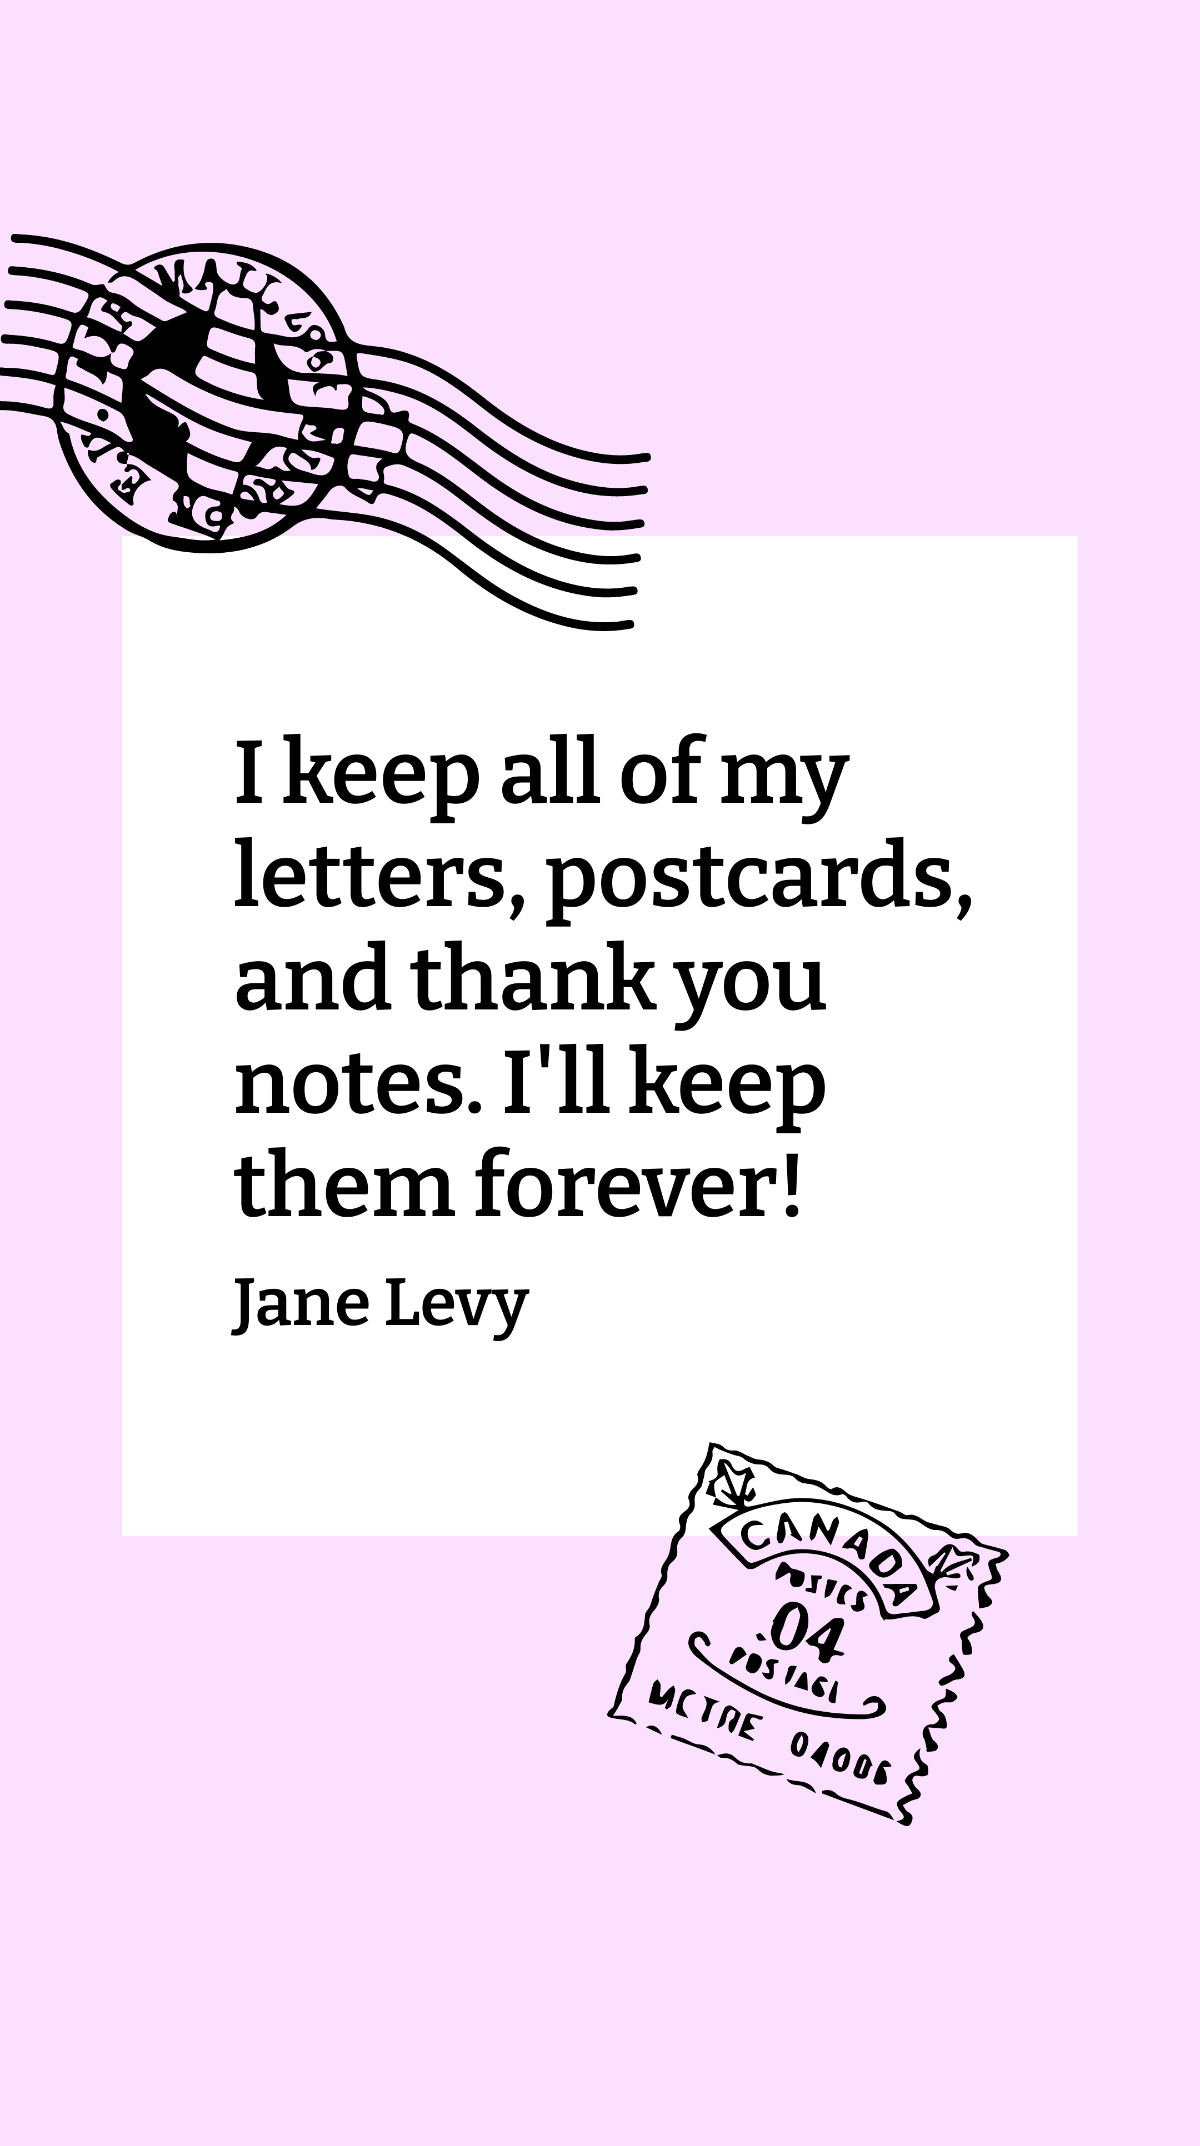 Jane Levy - I keep all of my letters, postcards, and thank you notes. I'll keep them forever!